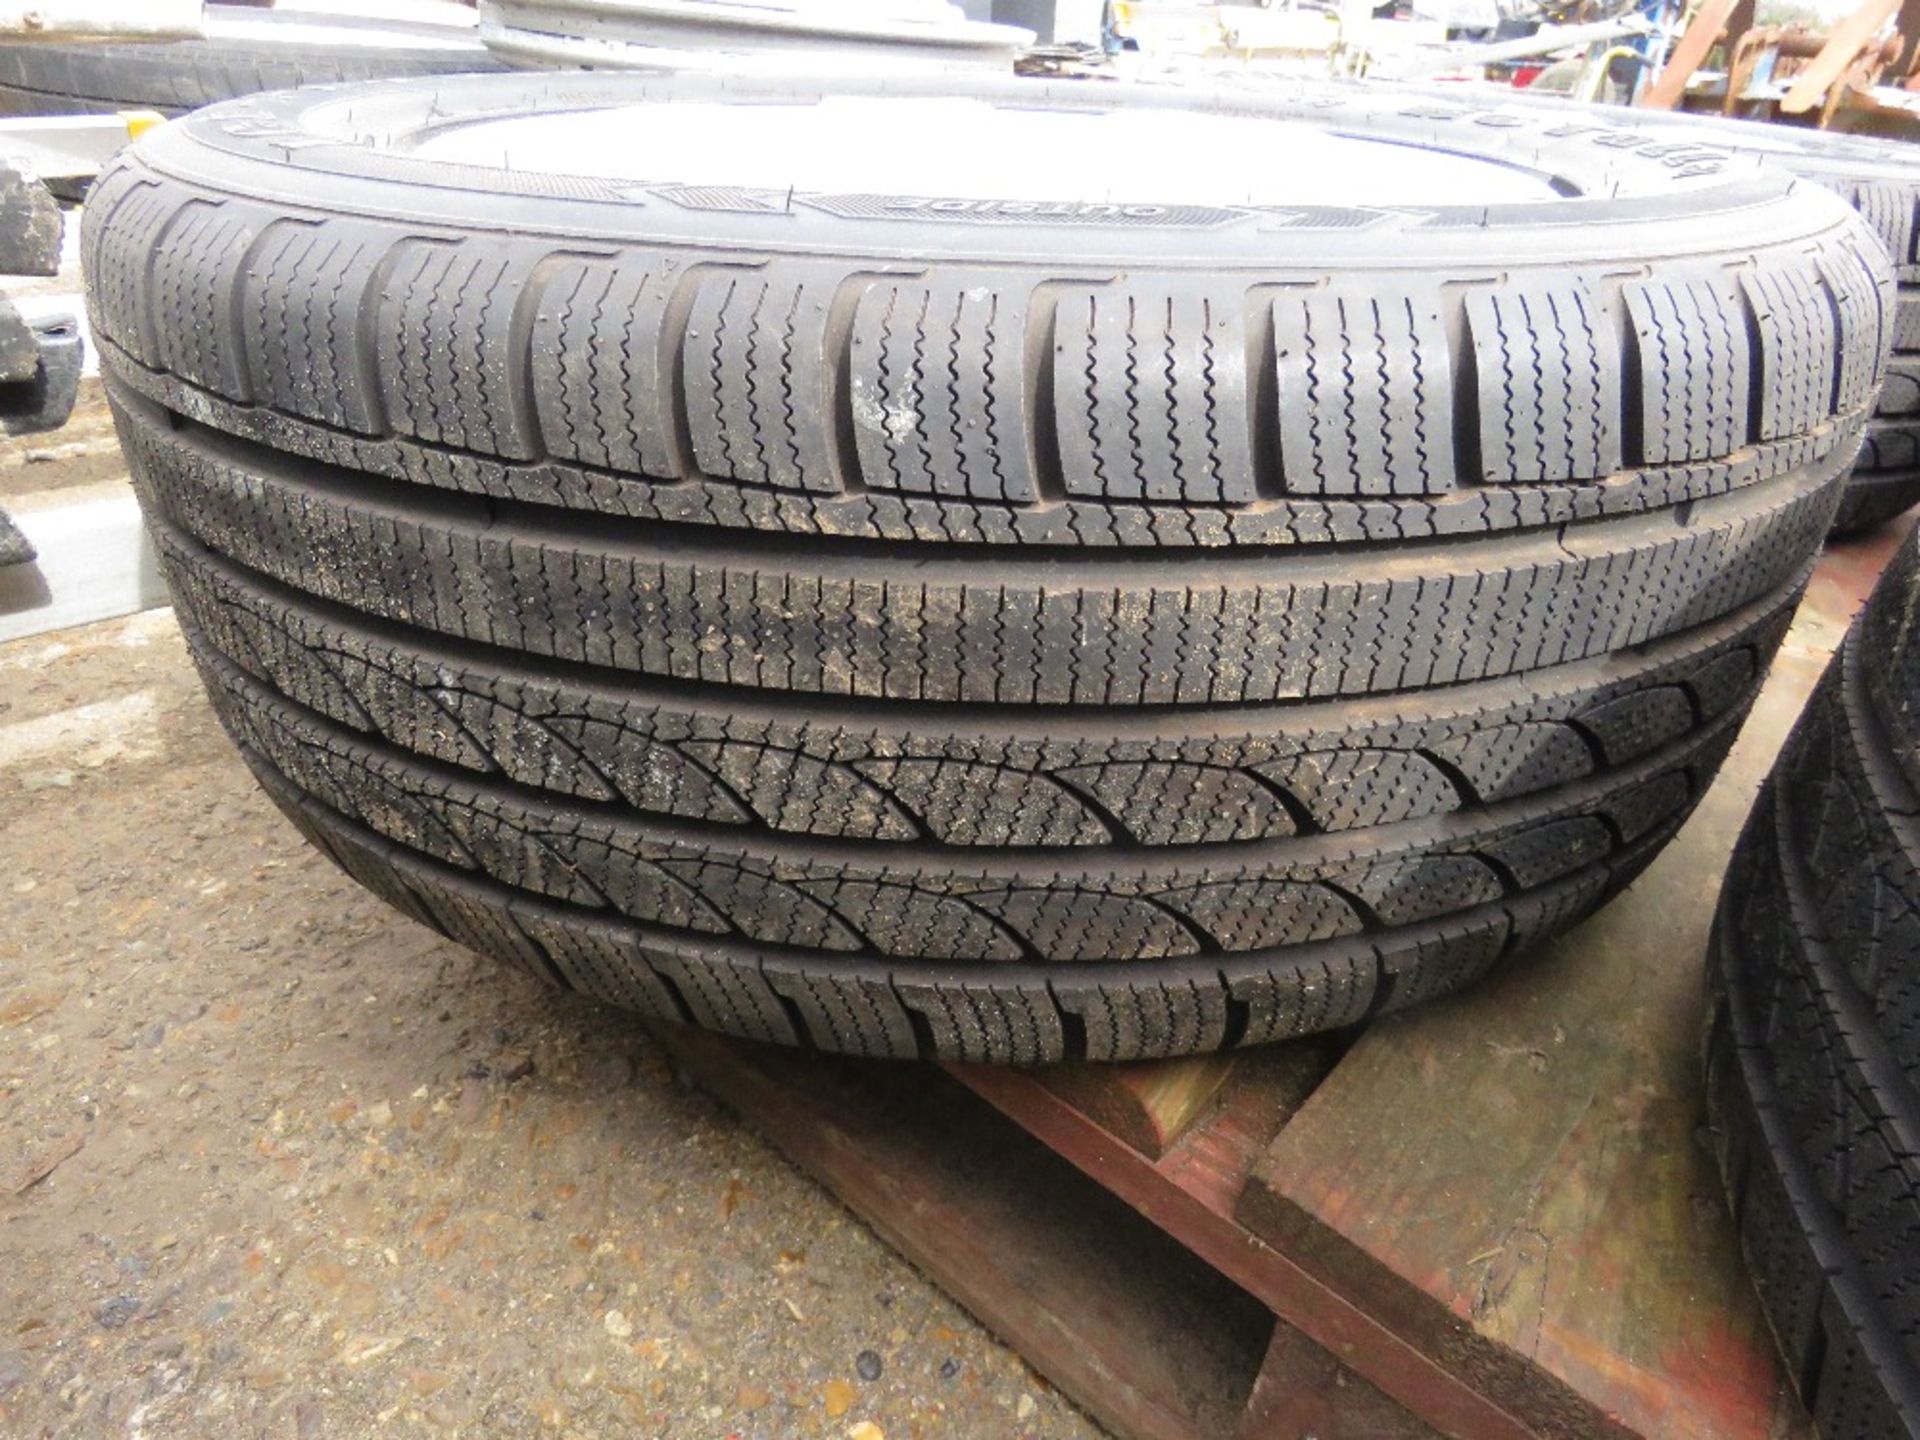 SET OF VW 235/55R17 SNOW TYRES ON ALLOY RIMS. - Image 5 of 5